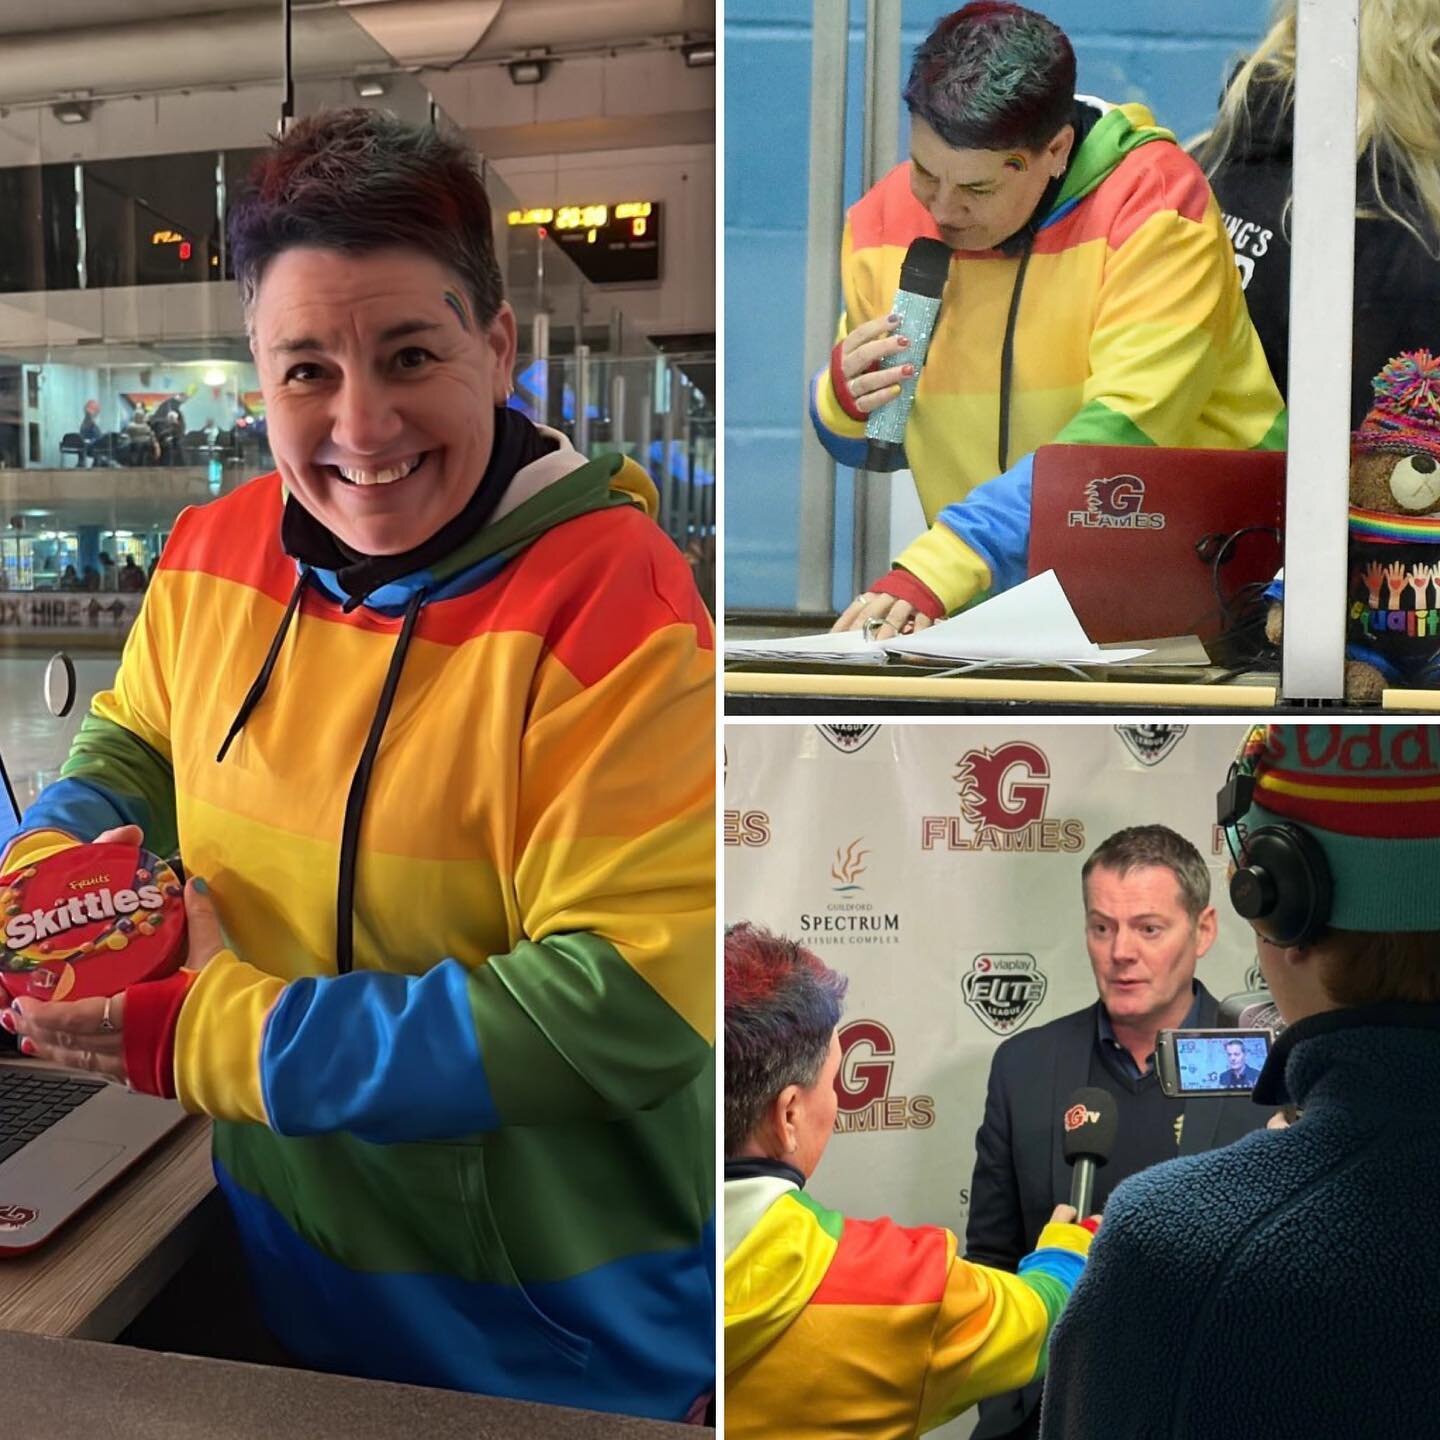 An honour to DJ Pride night at @spectrumicerink for @flamesicehockey vs @cardiffdevilsofficial last night, wearing pride colours representing diversity and inclusivity. #youcanplay #hockeyisforeveryone